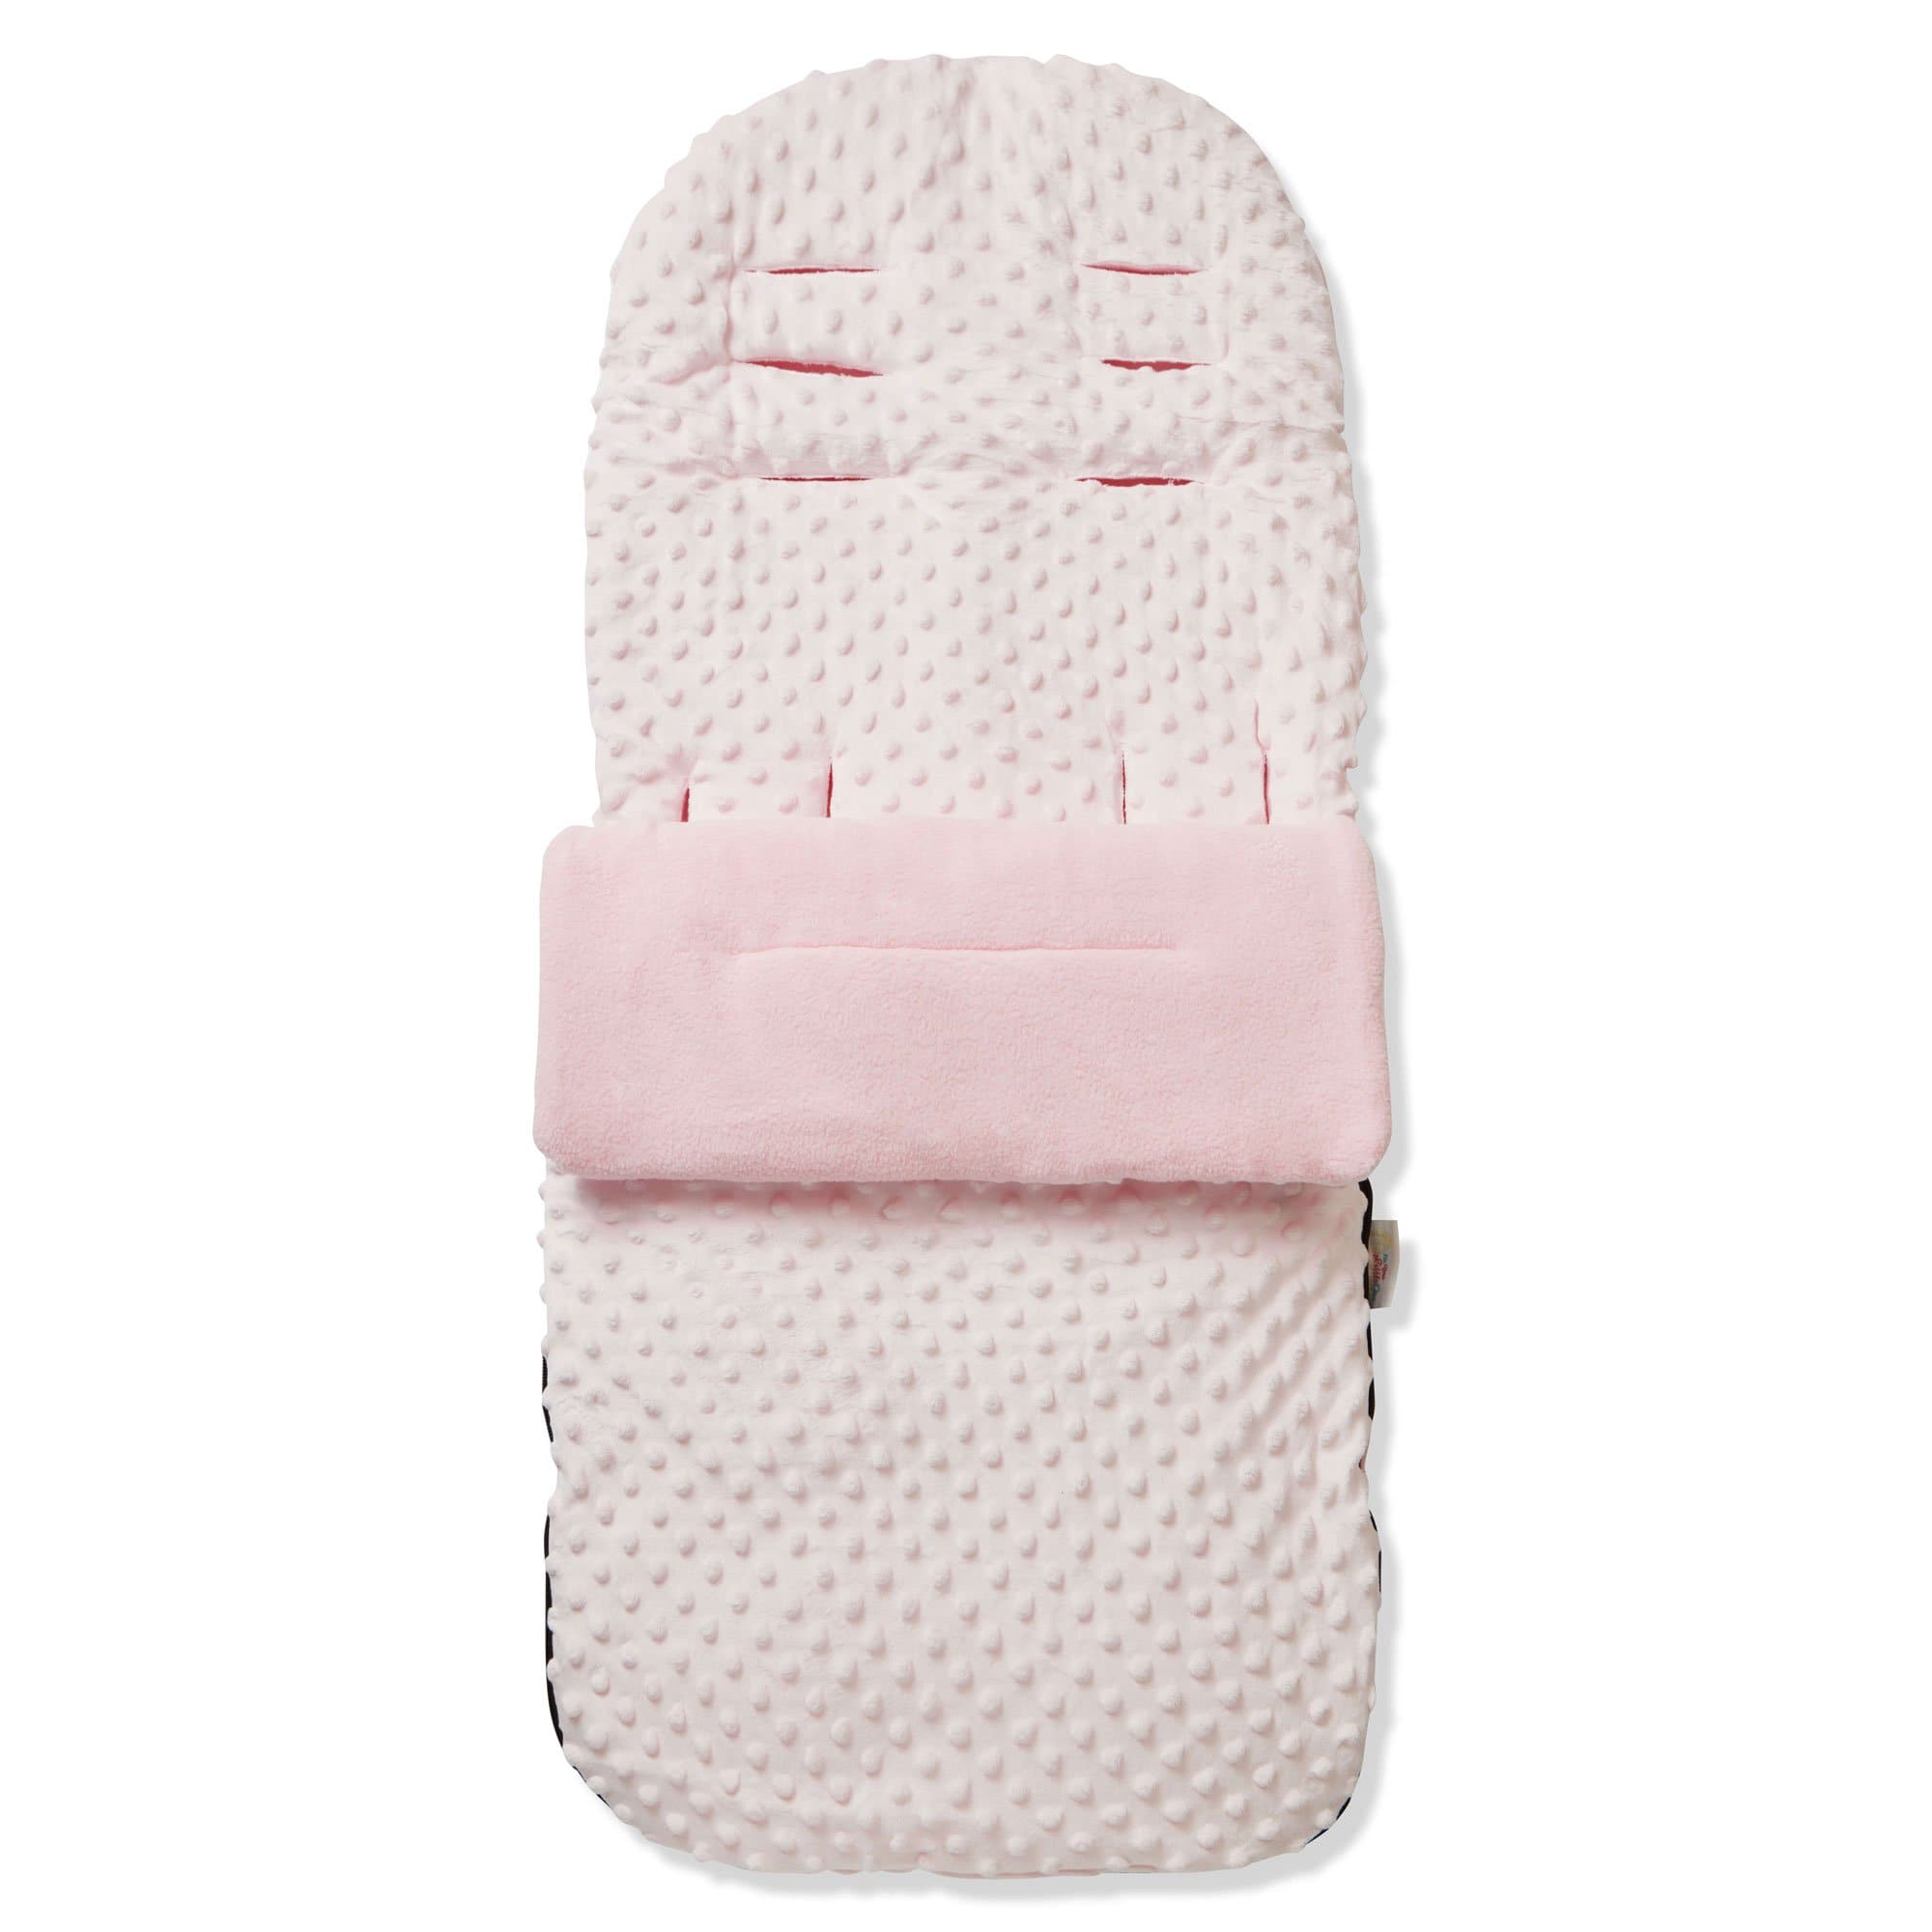 Dimple Footmuff / Cosy Toes Compatible with My Babiie - For Your Little One